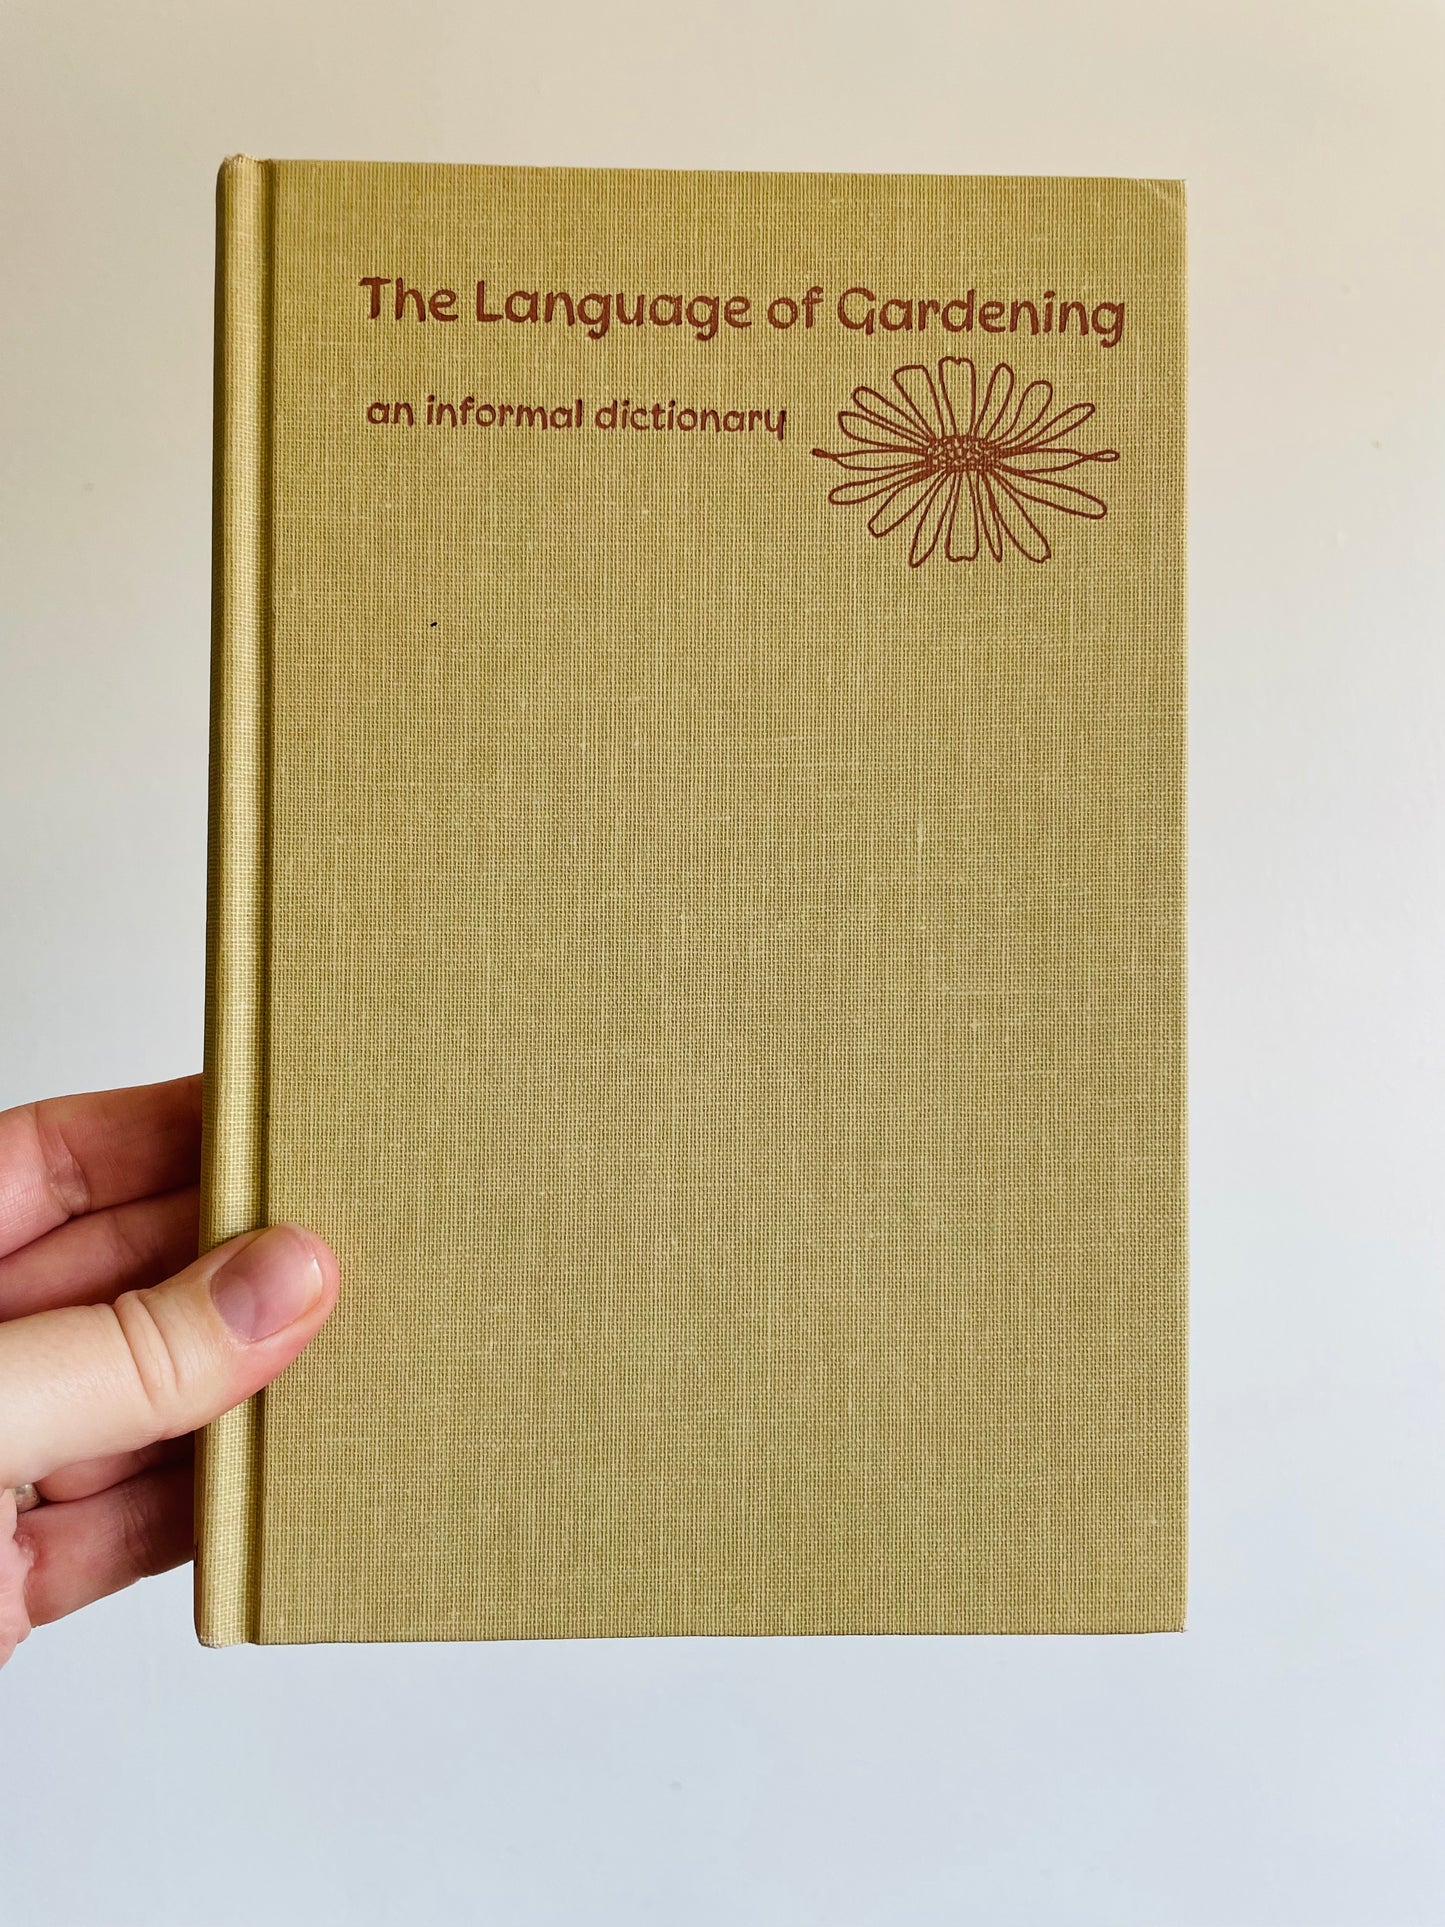 The Language of Gardening by George F. Hull (1967) - Hardcover Illustrated Book